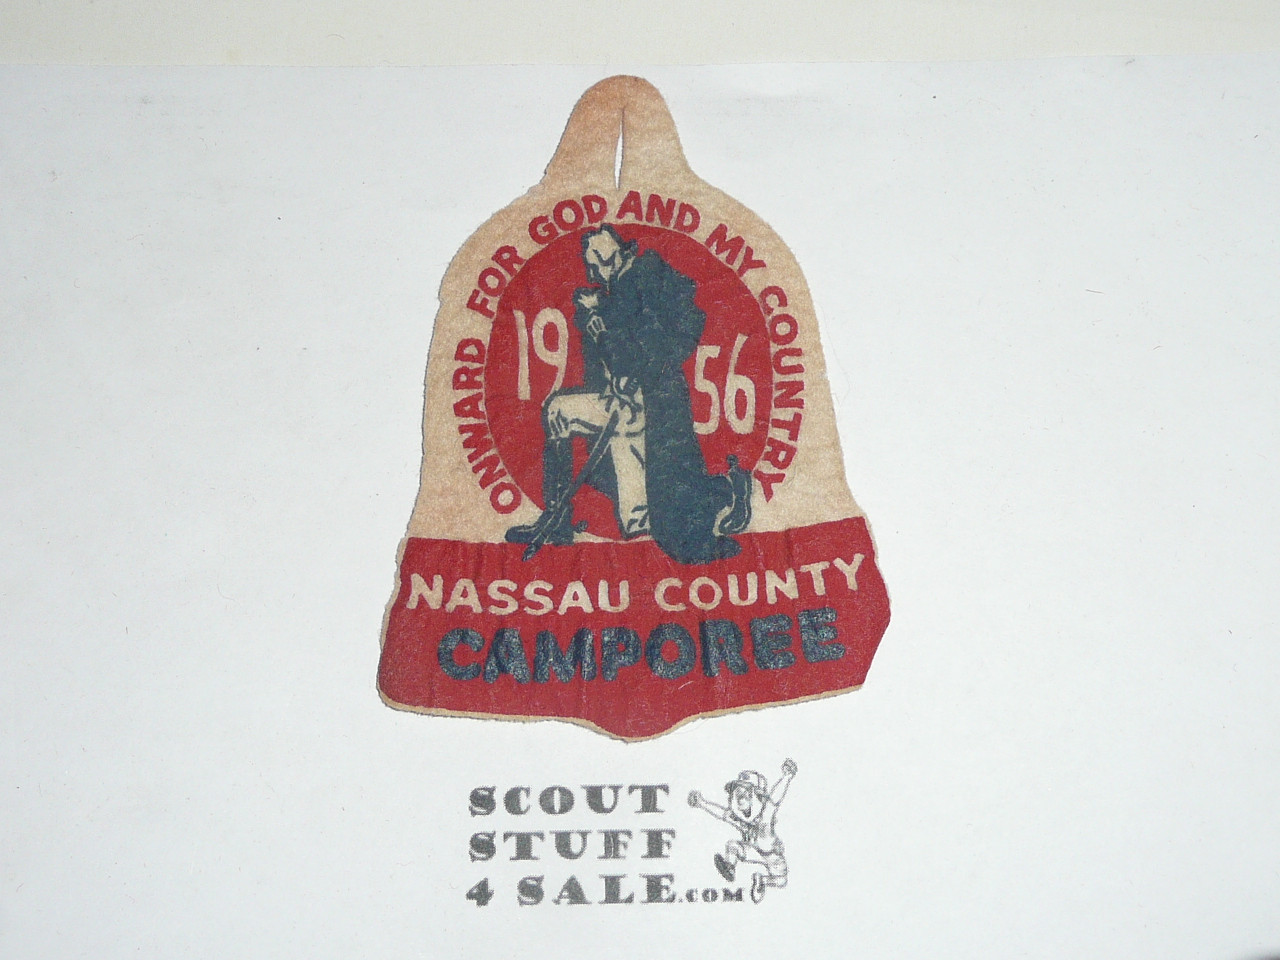 1956 Nassau County Council Onward for God and My Country Felt Camporee Patch